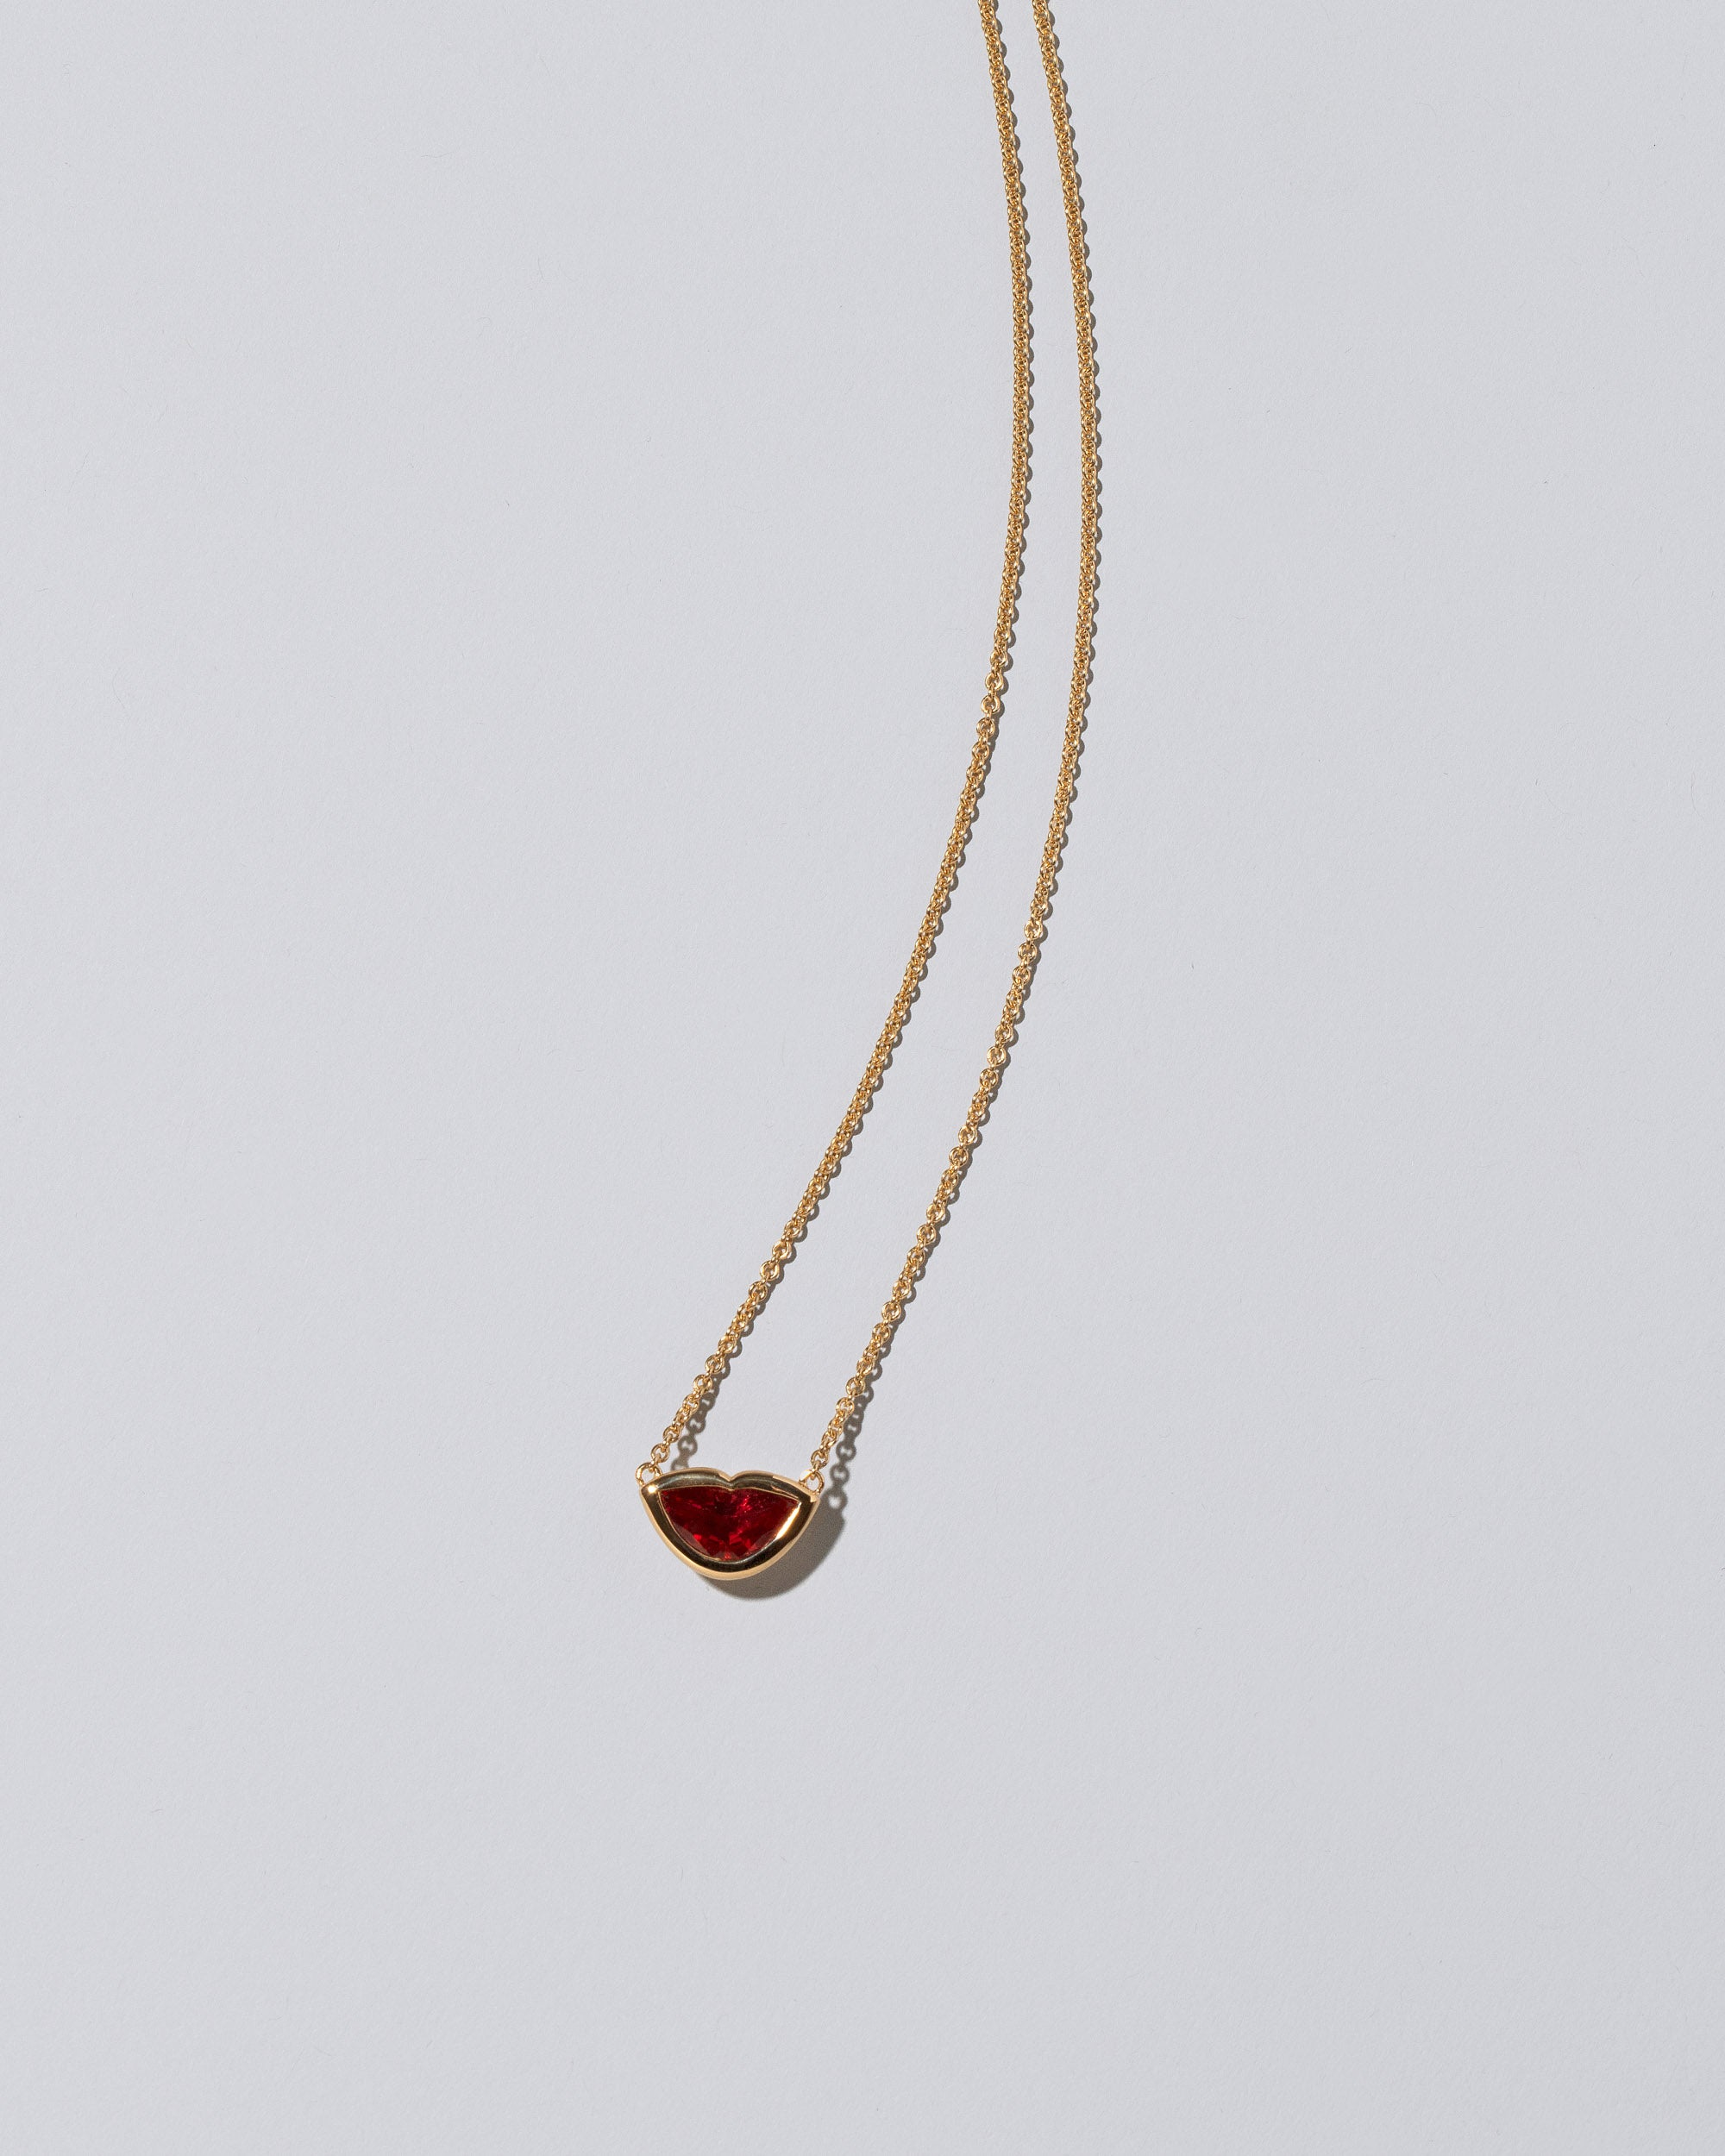 Lover's Kiss Necklace - Red Spinel